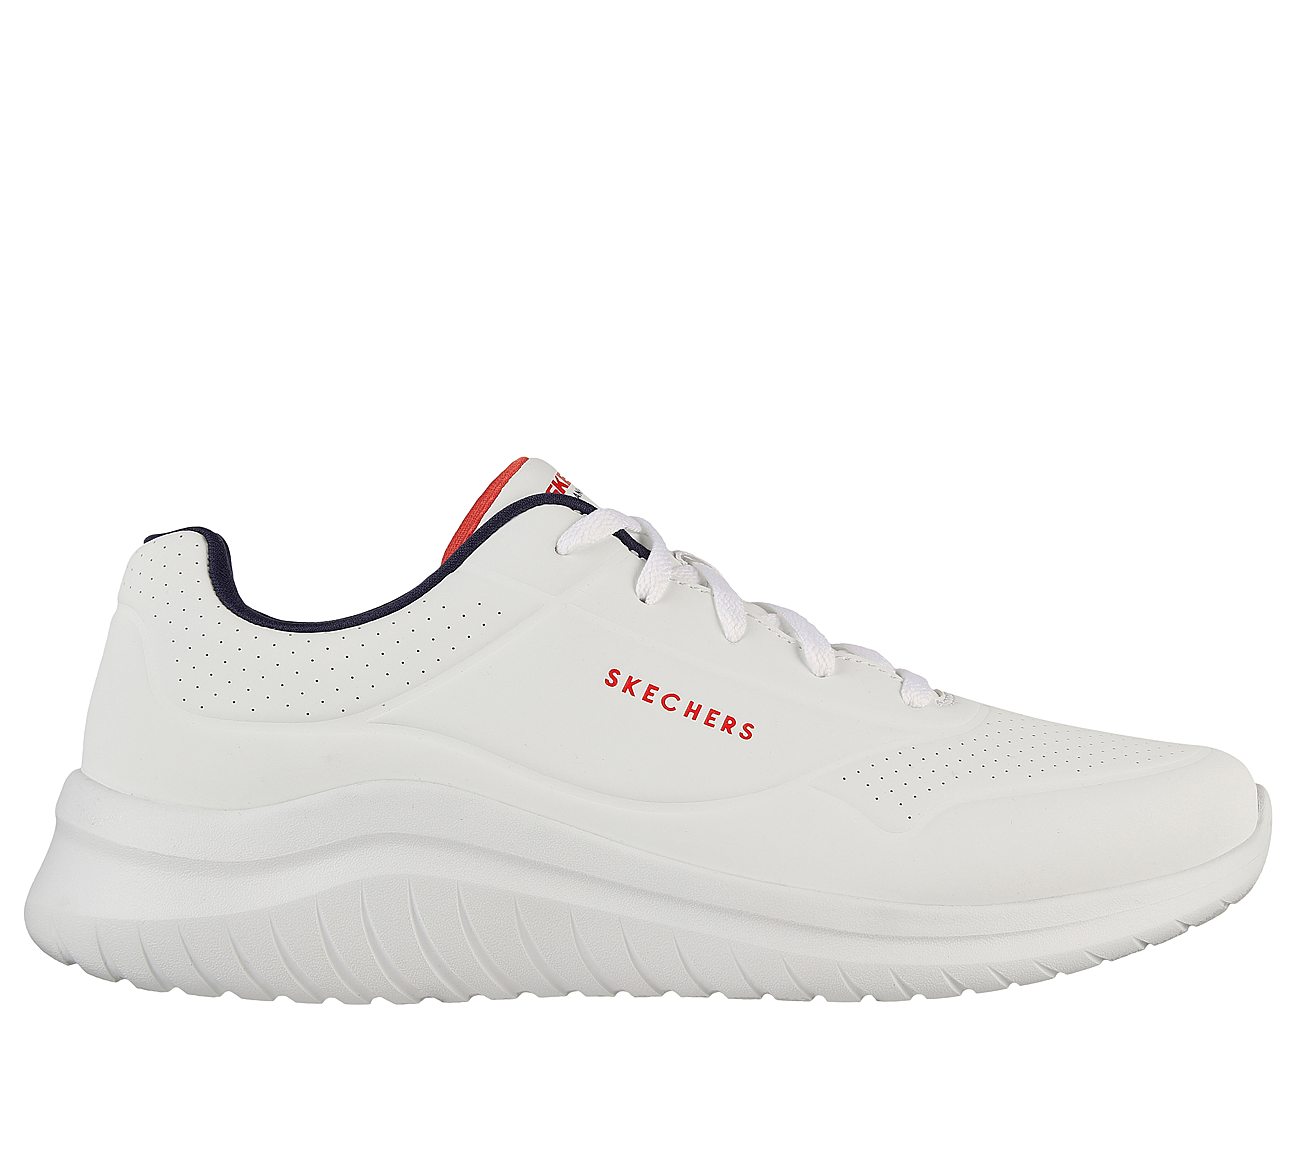 ULTRA FLEX 2, WHITE/NAVY/RED Footwear Lateral View